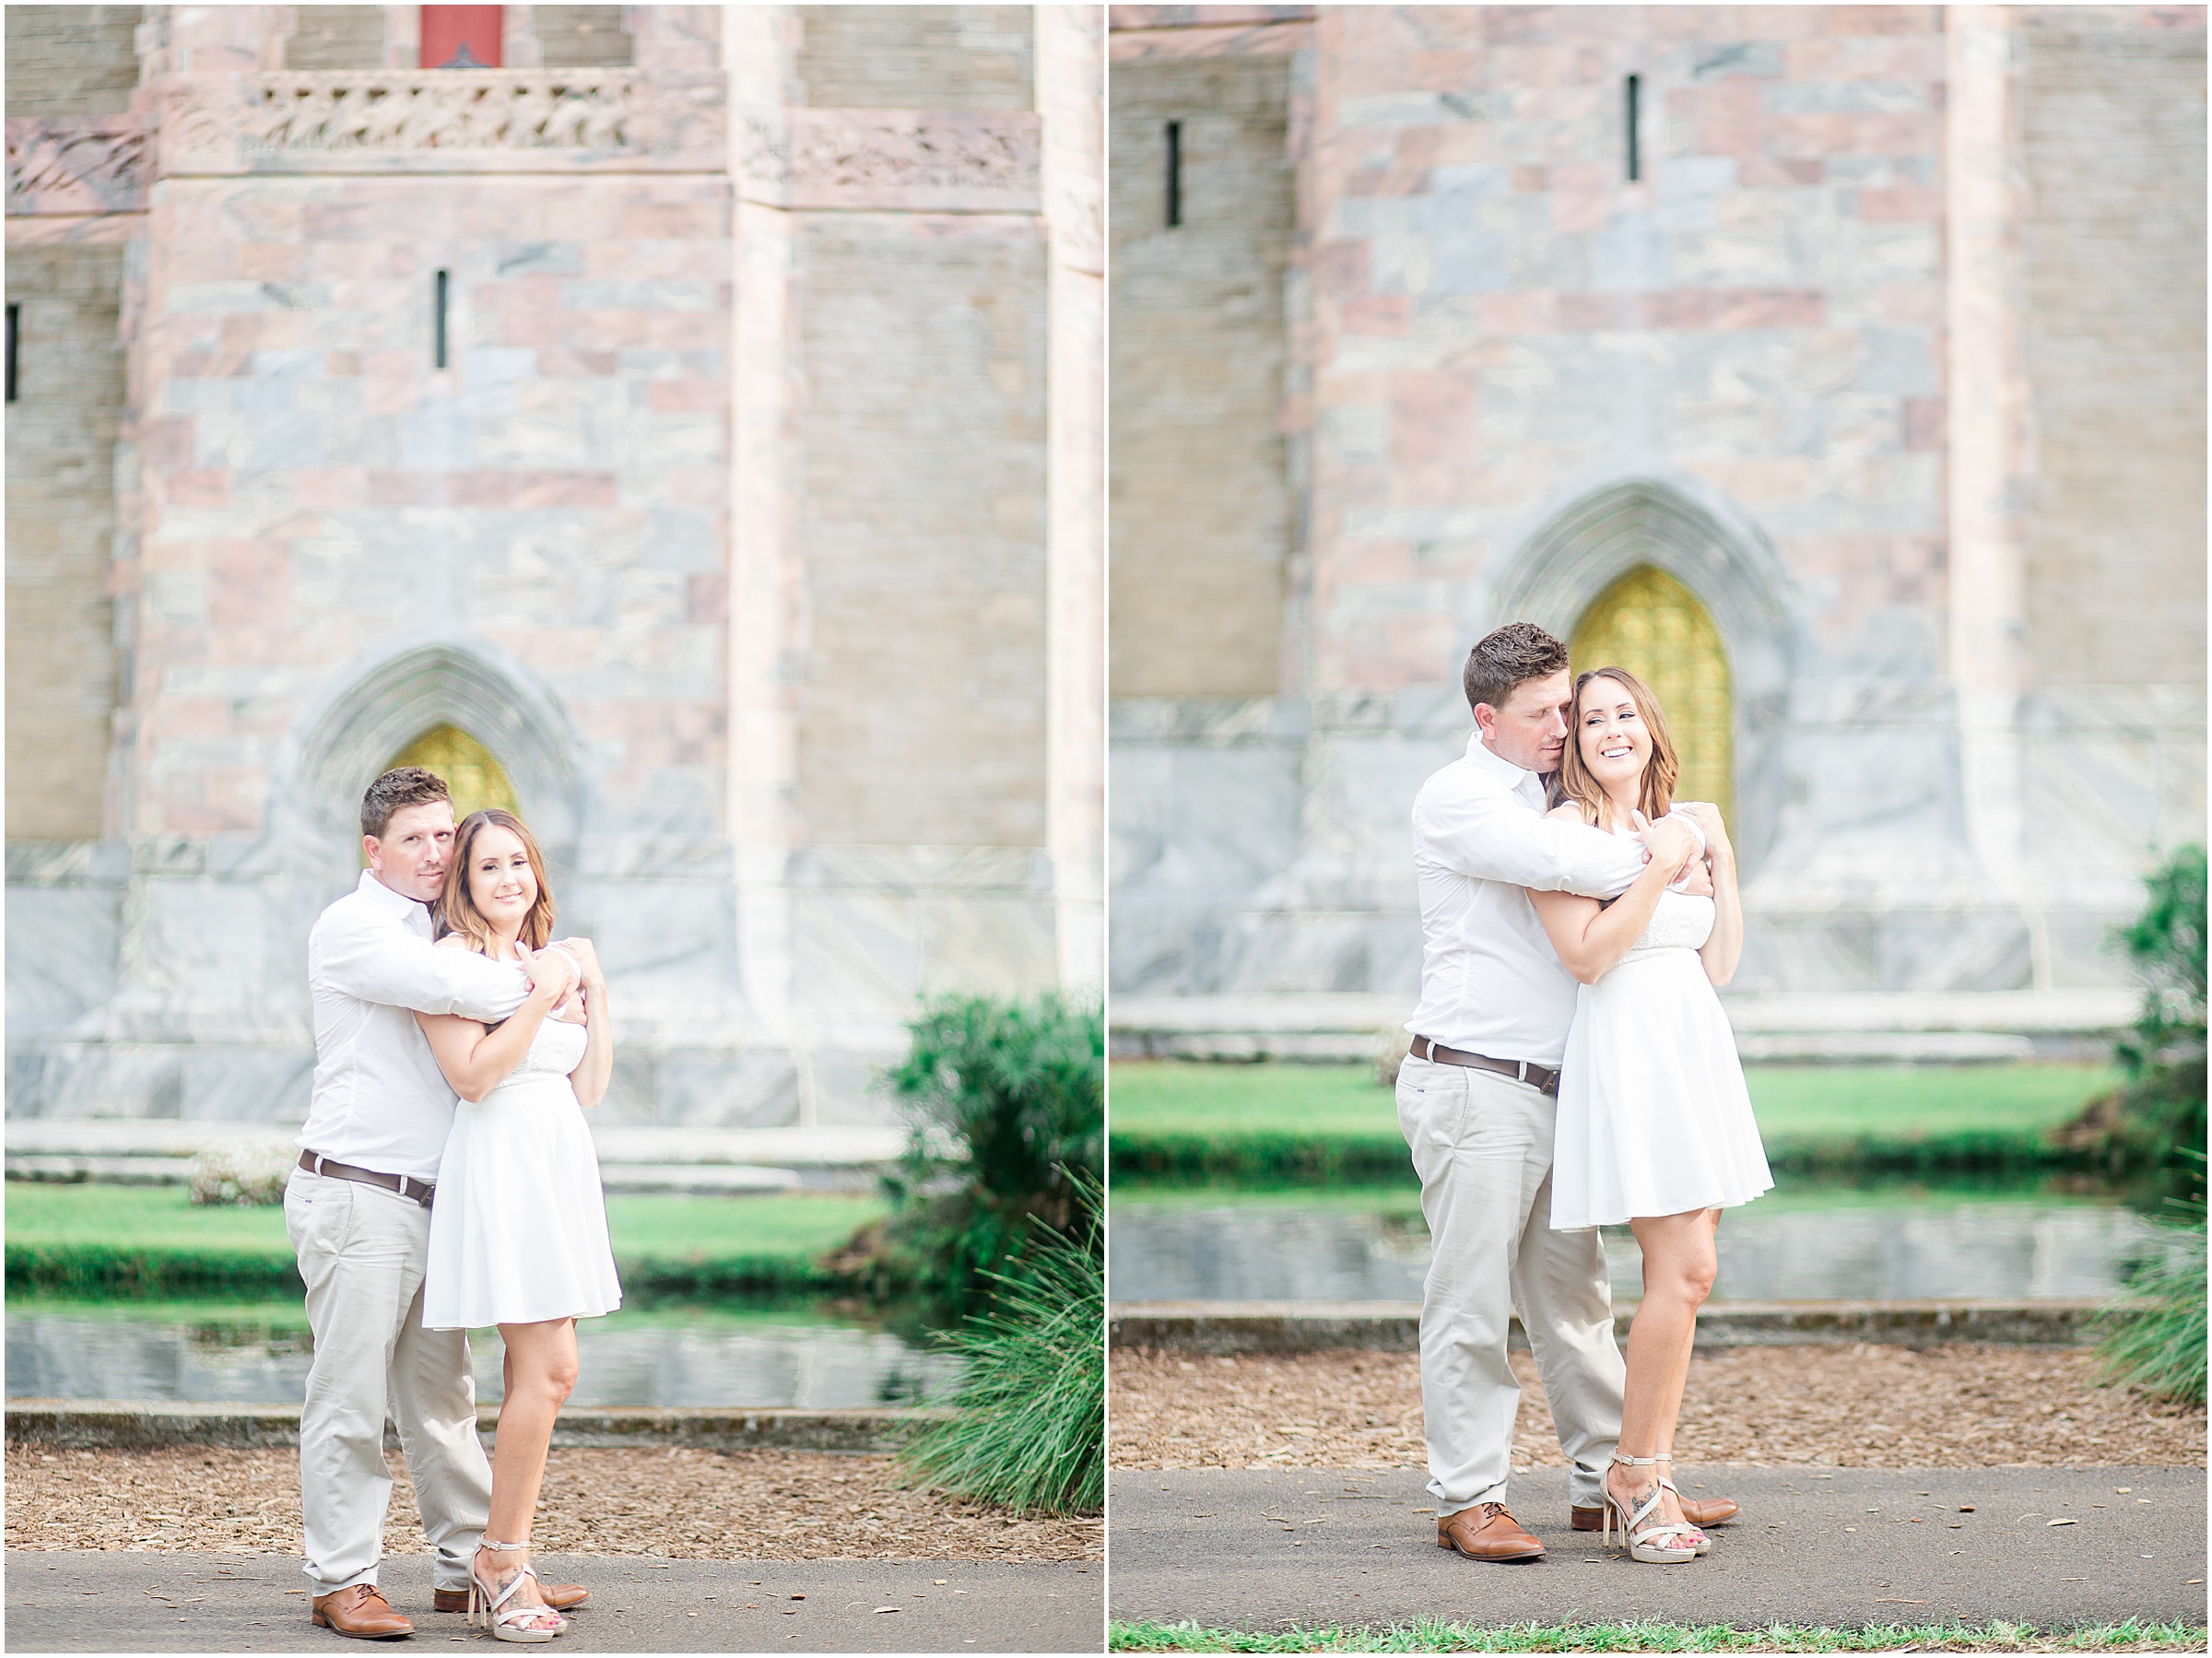 Jessica & Brad, newly engaged, at Bok Tower Gardens in Lake Wales, Florida.